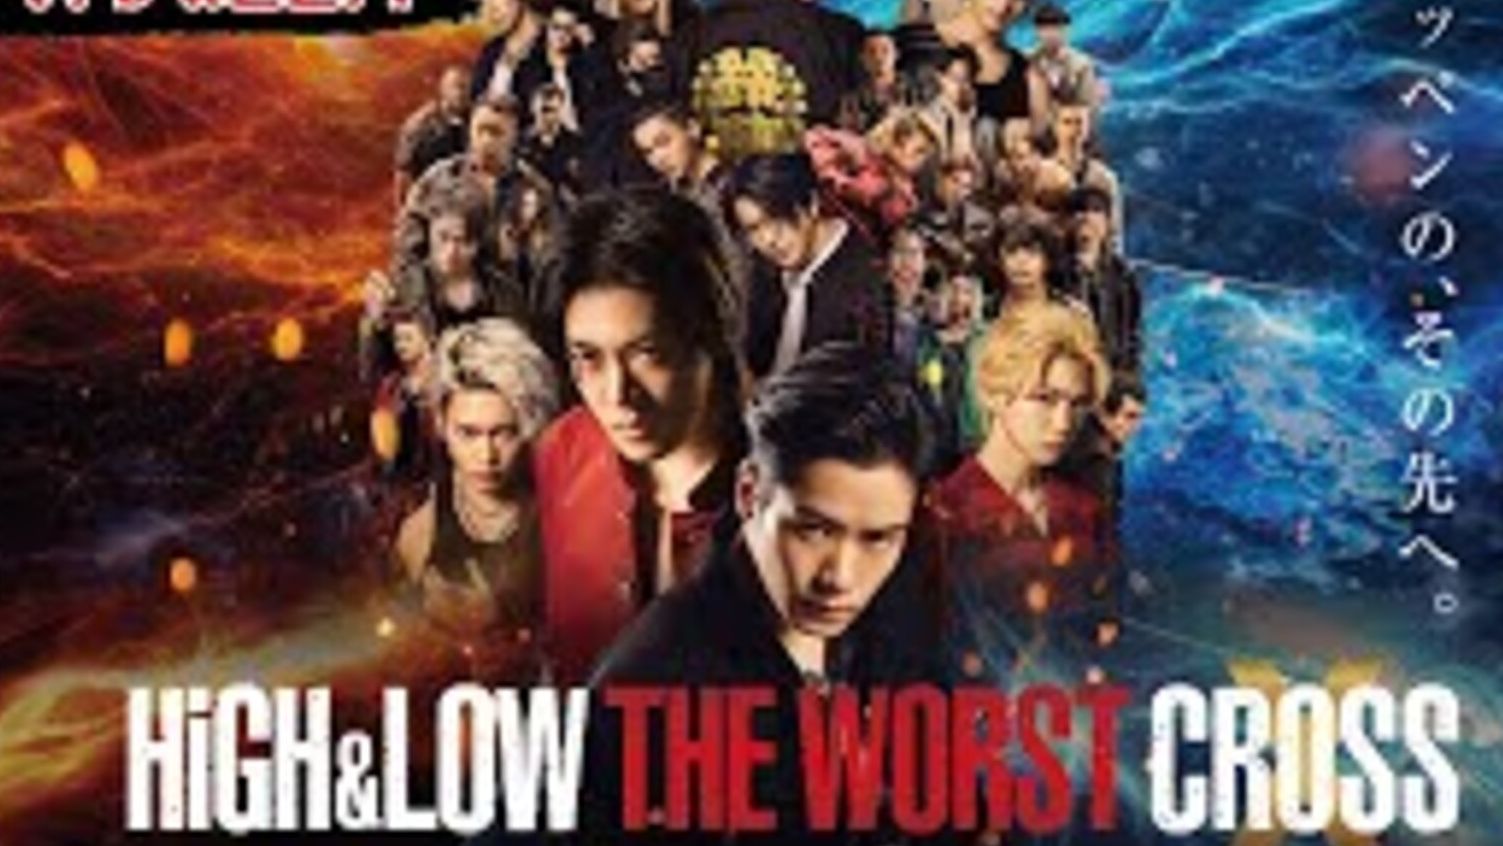 Link Nonton Film High And Low The Worst X Cross 2022 Full Movie Hd Sub 5716